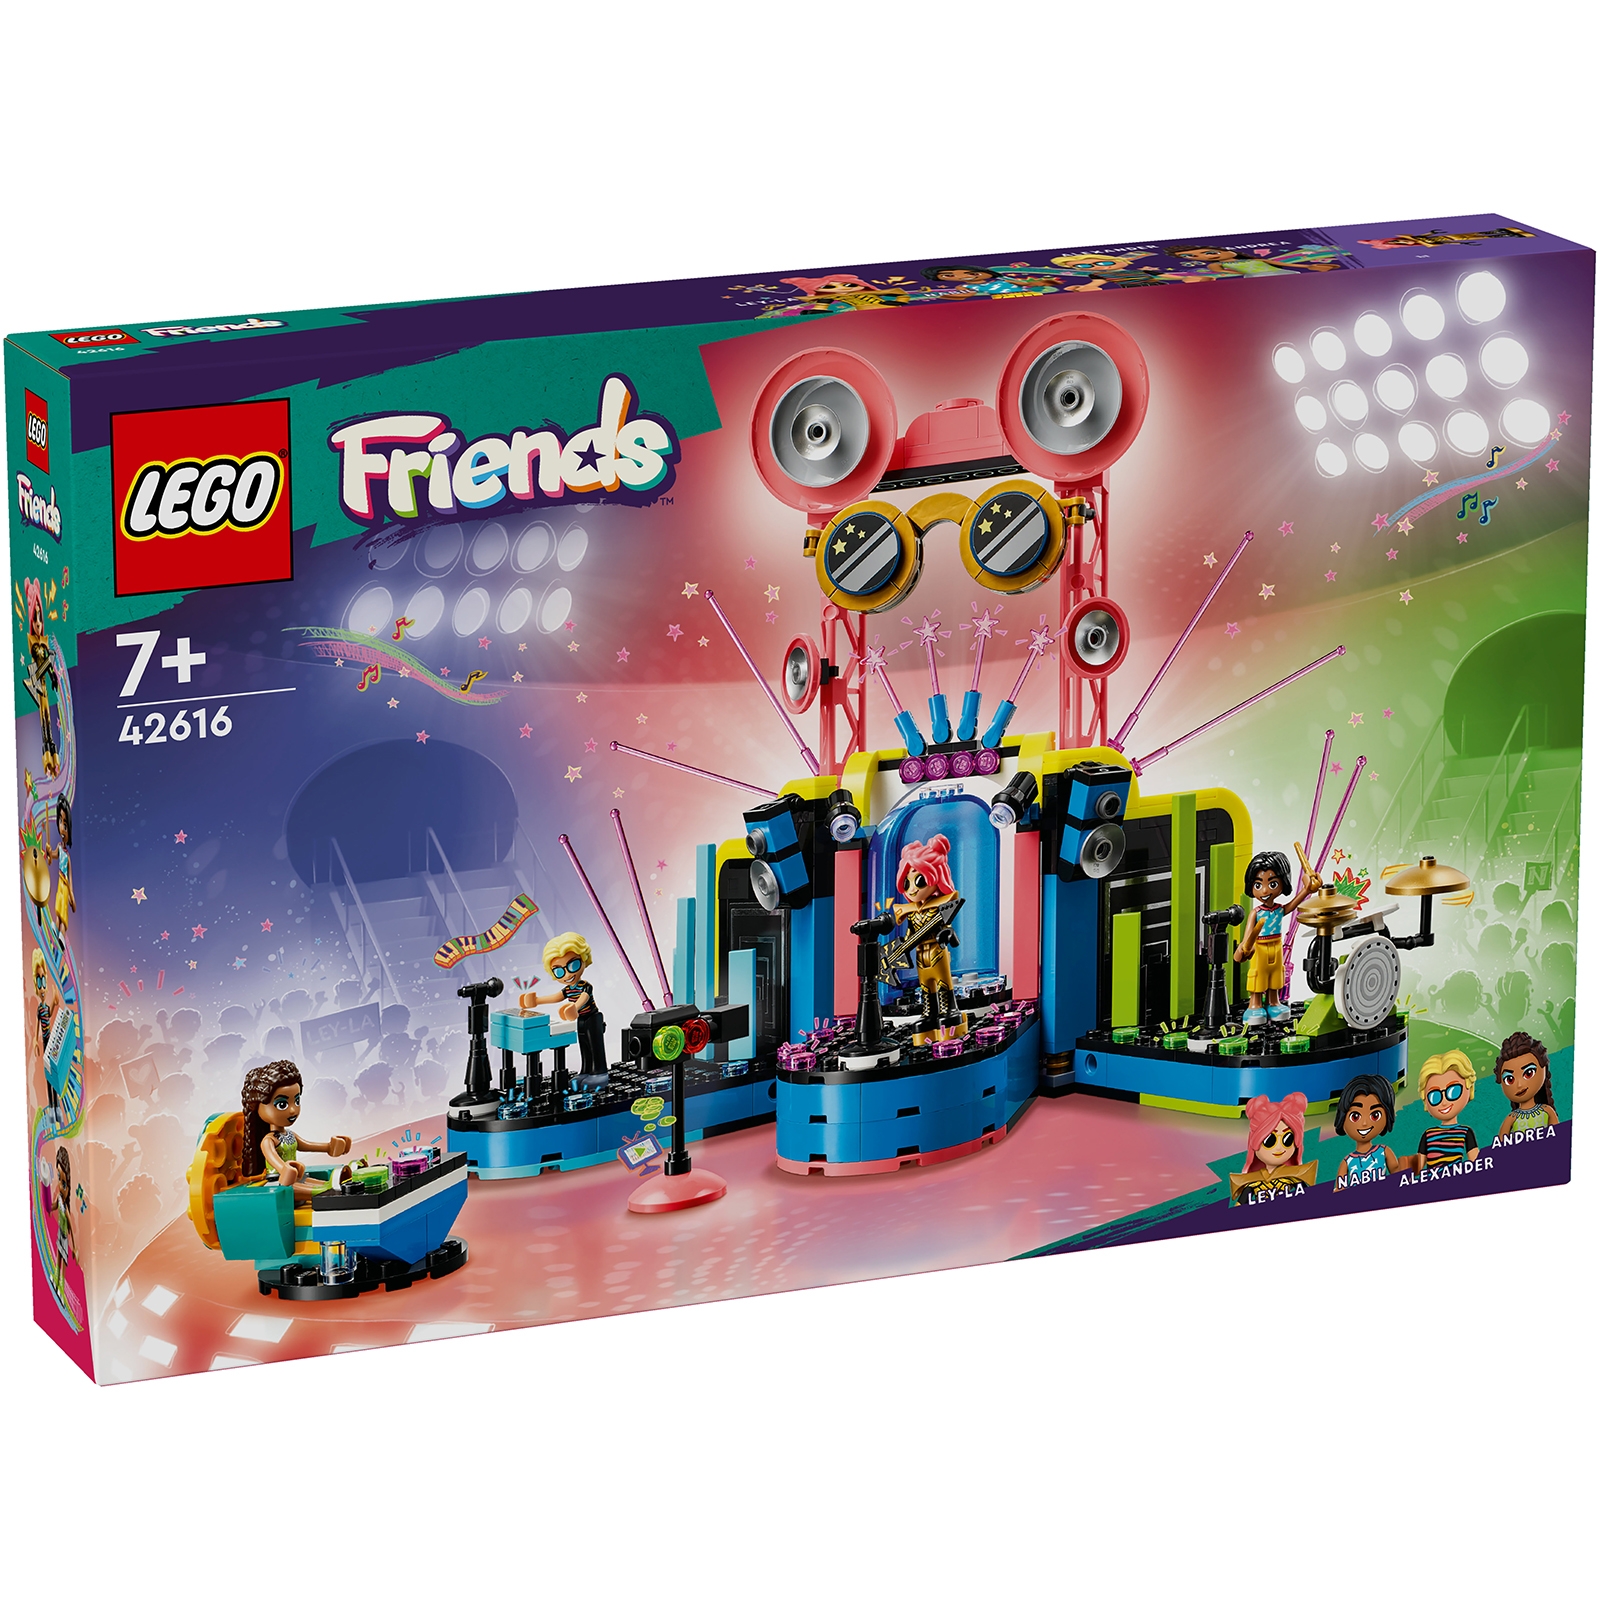 Image of 42616 LEGO® FRIENDS Talent show in Heartlake City